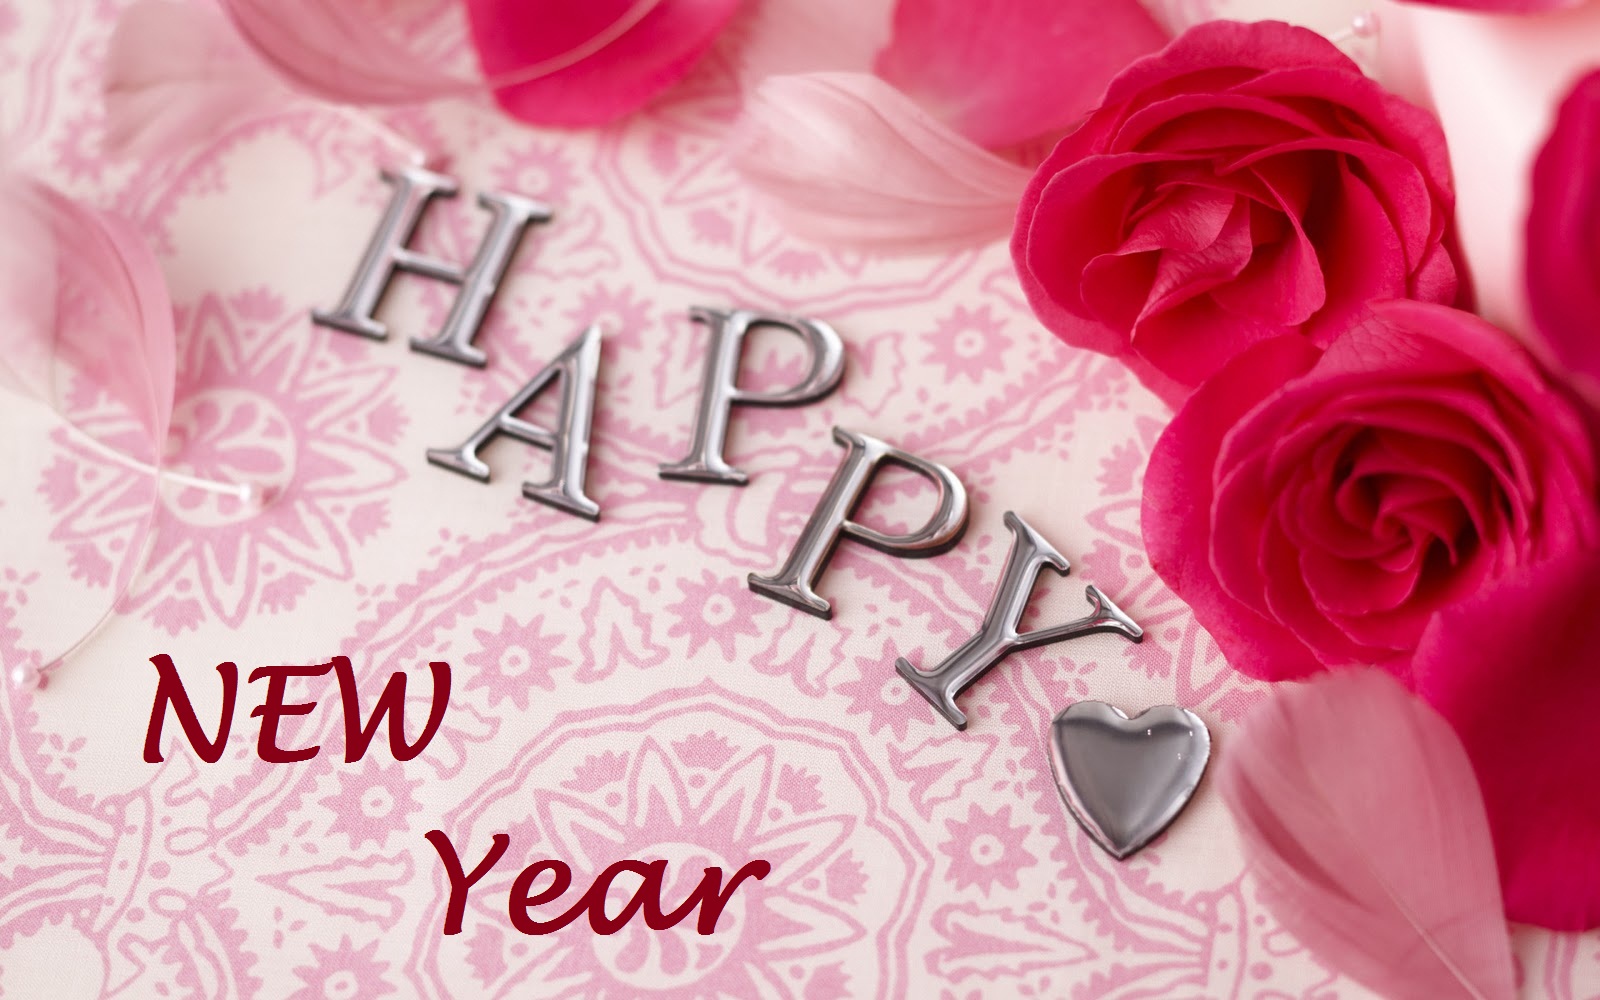 Free download Beautiful HD Wallpapers For Happy New Year 2020 Download